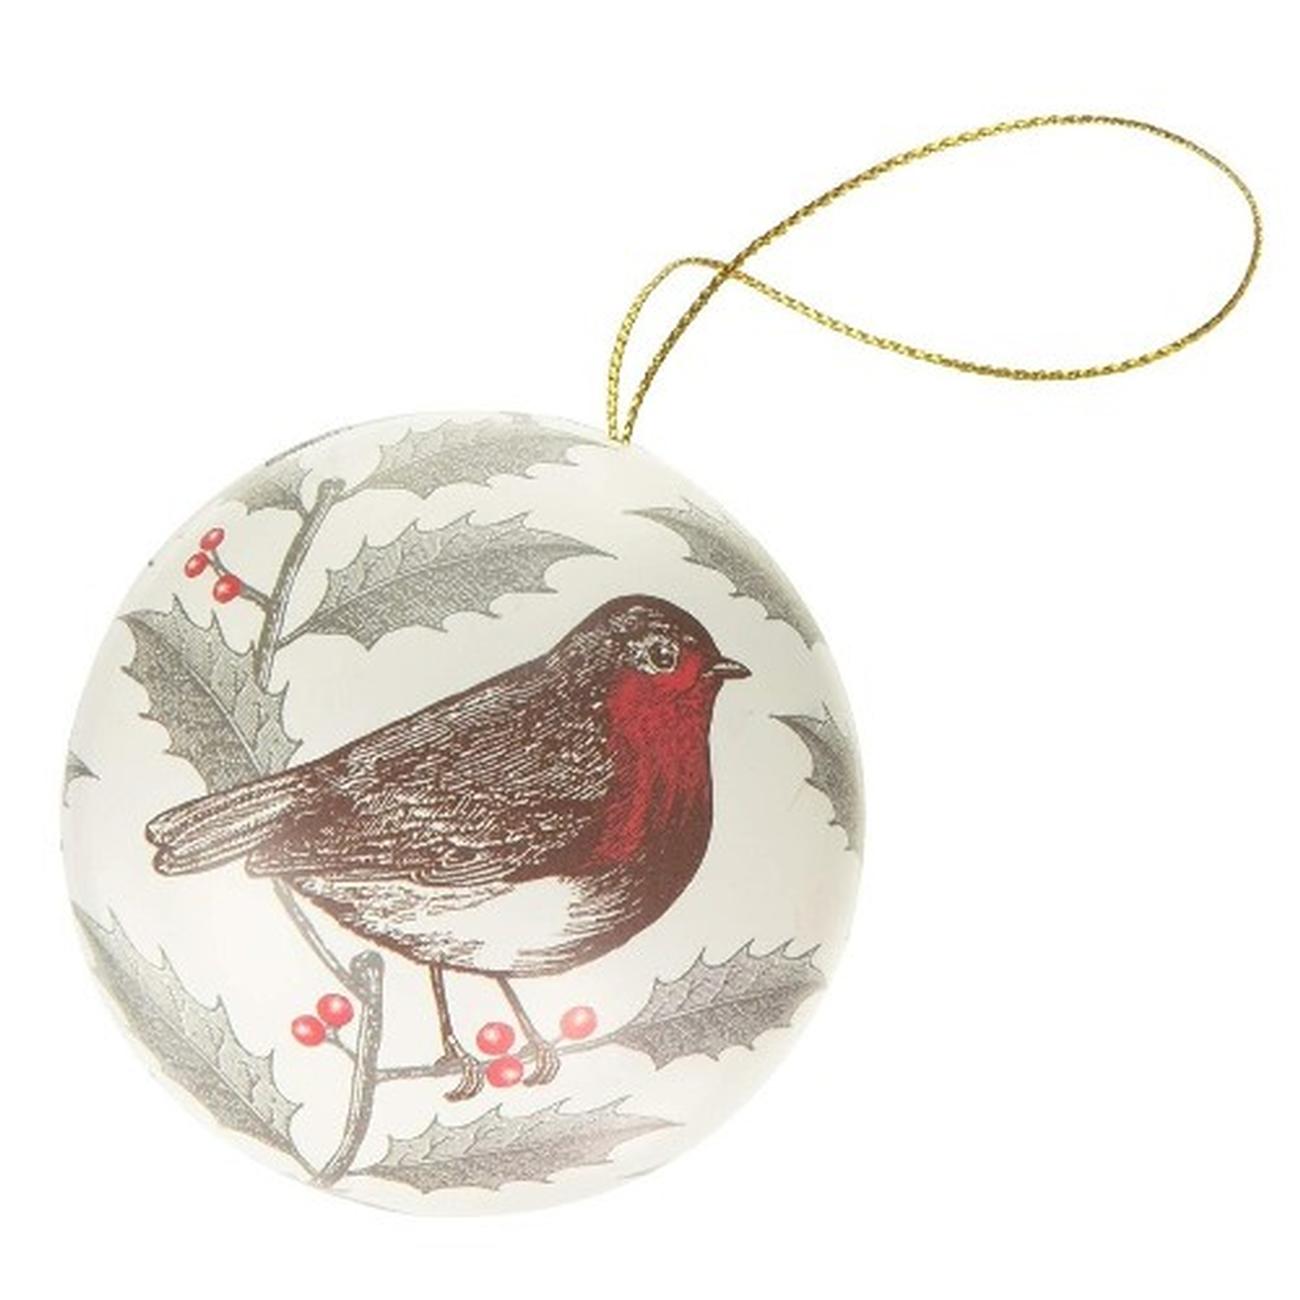 thornback-and-peel-Christmas-bauble-candy-tin-robin-and-holly - Thornback & Peel Robin & Holly Christmas Bauble